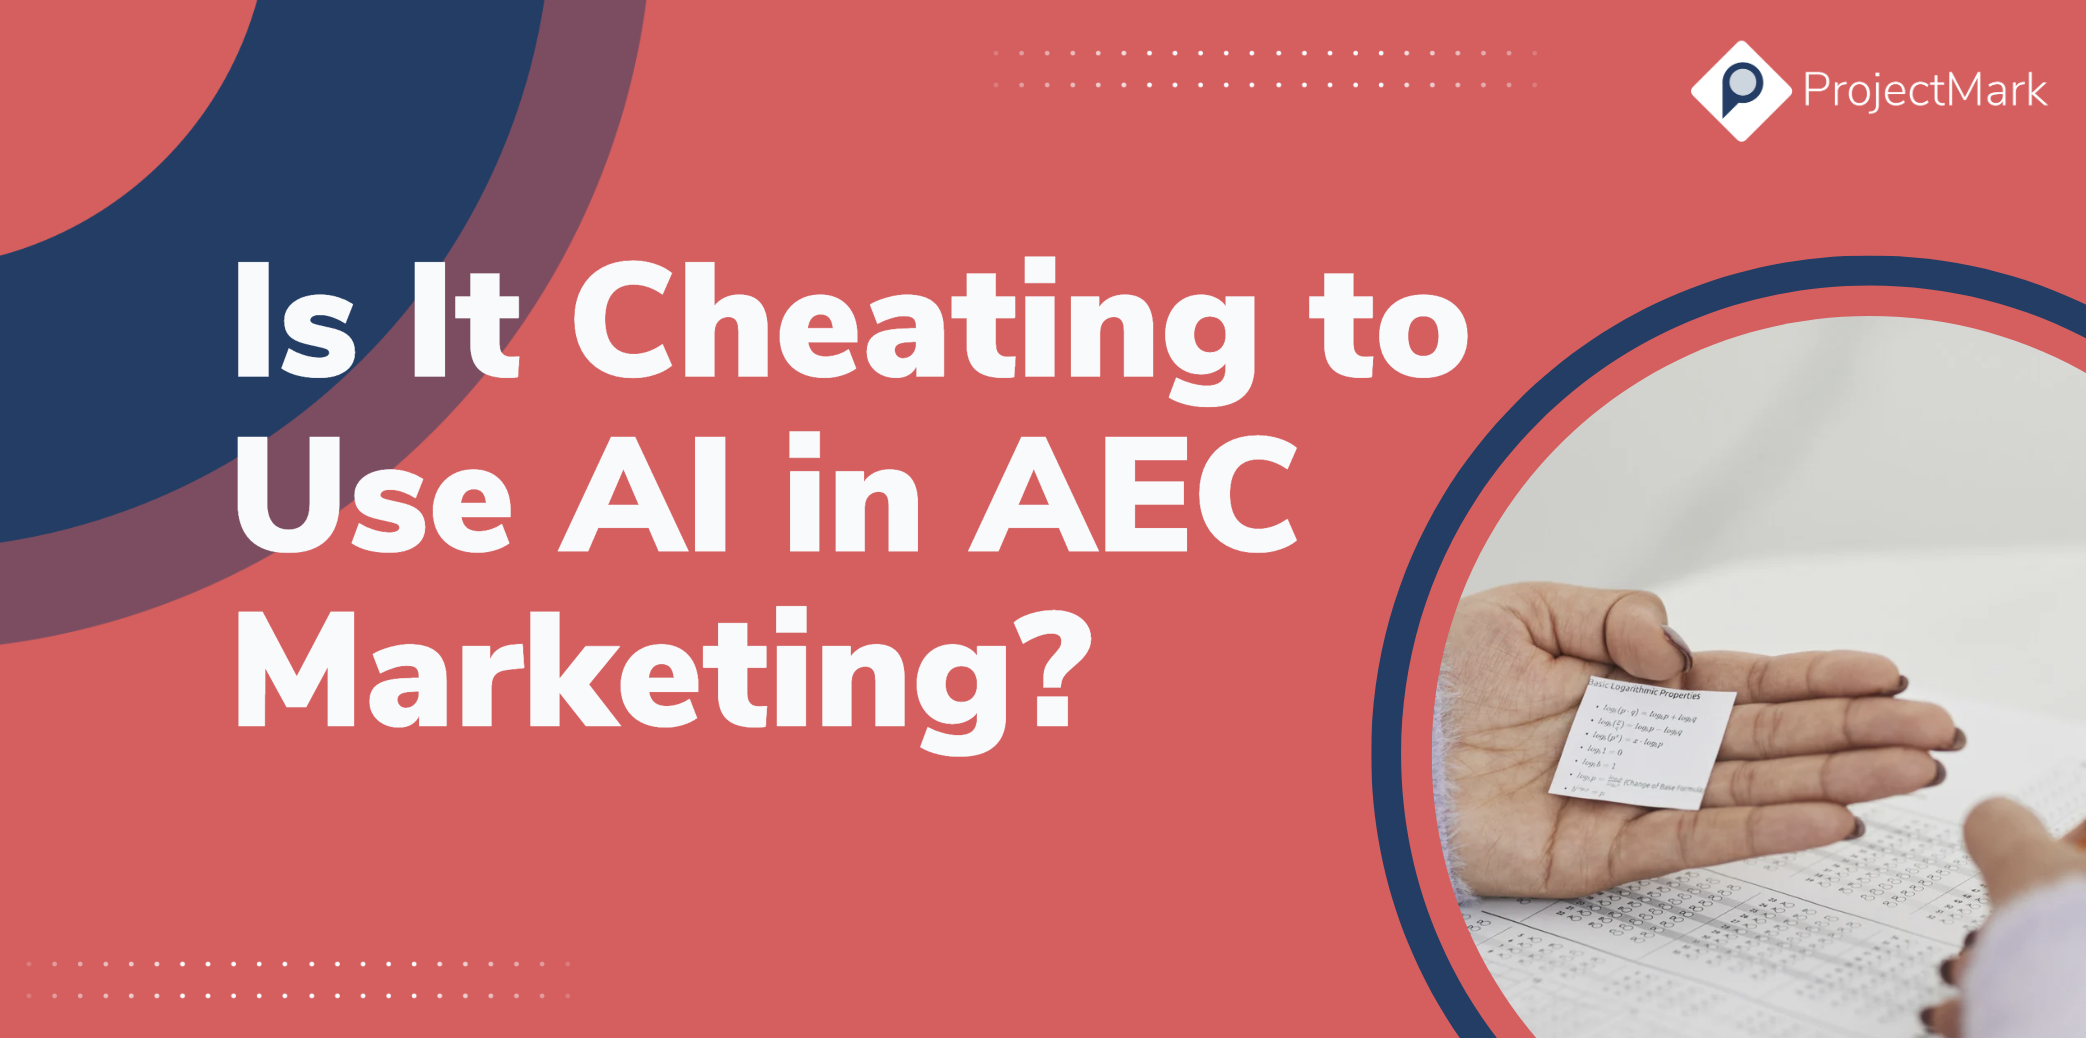 Is it Cheating to Use AI in AEC Marketing?